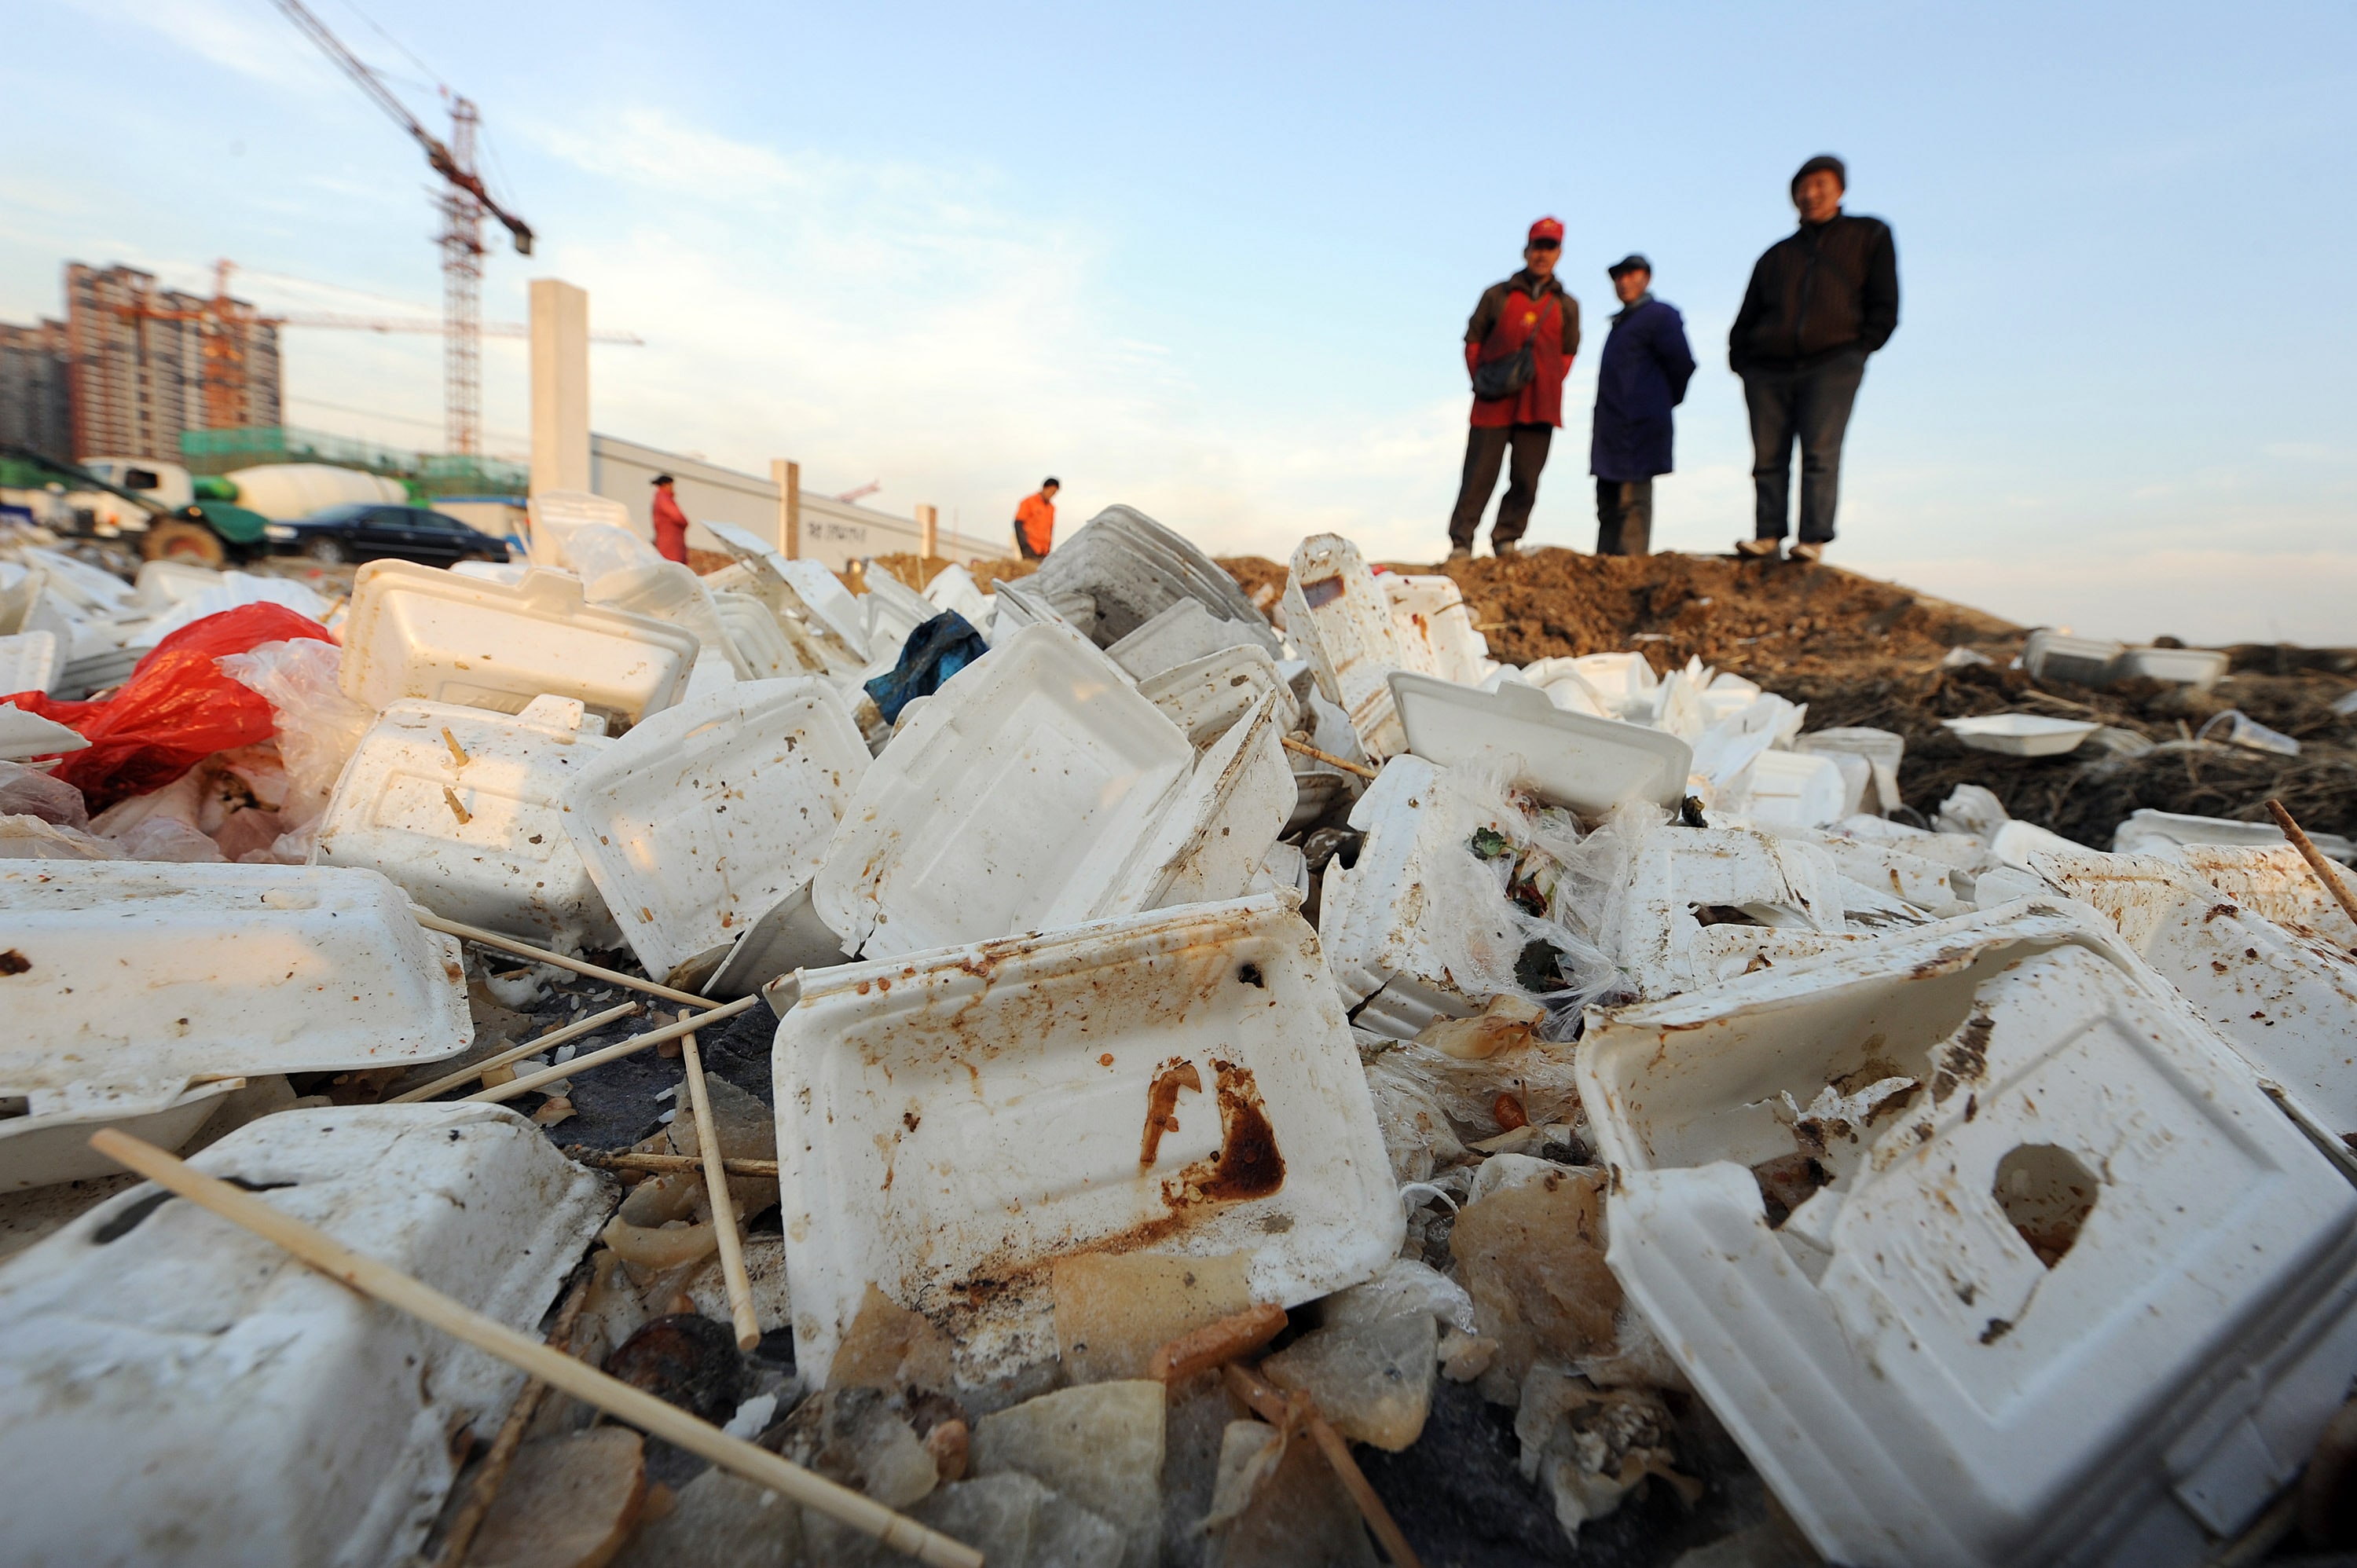 Workers stand over piles of used white p